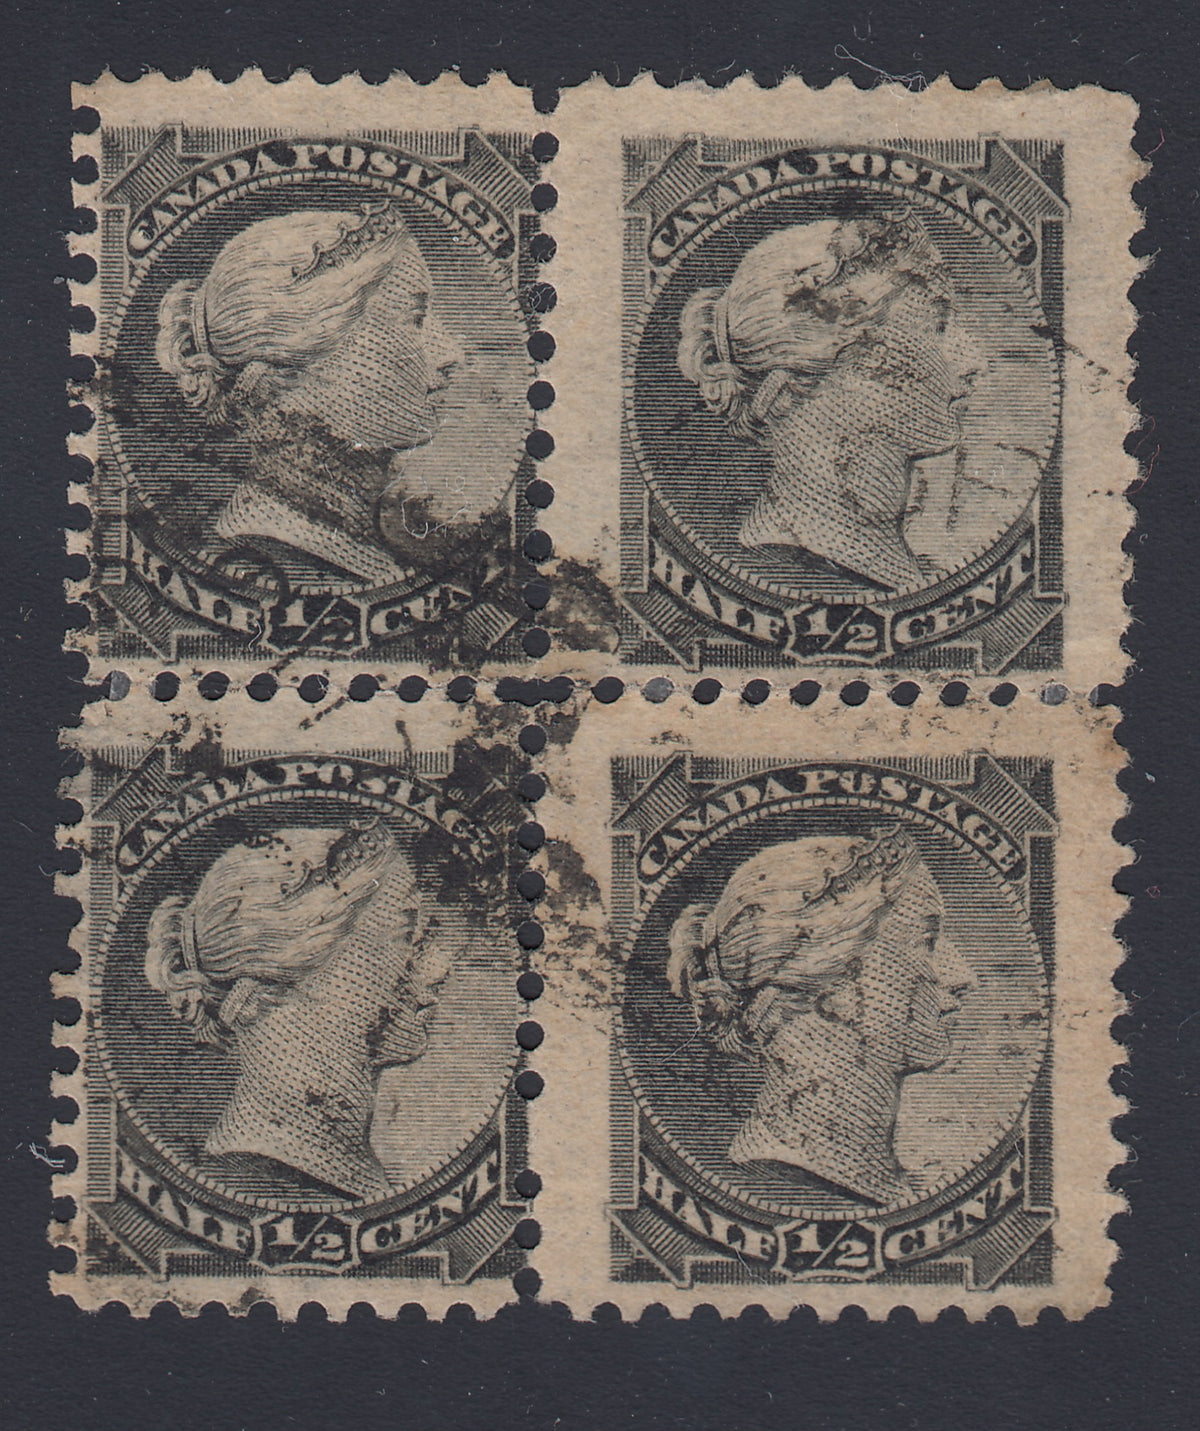 0034CA1712 - Canada #34 - Used Block of 4, Re-Entries